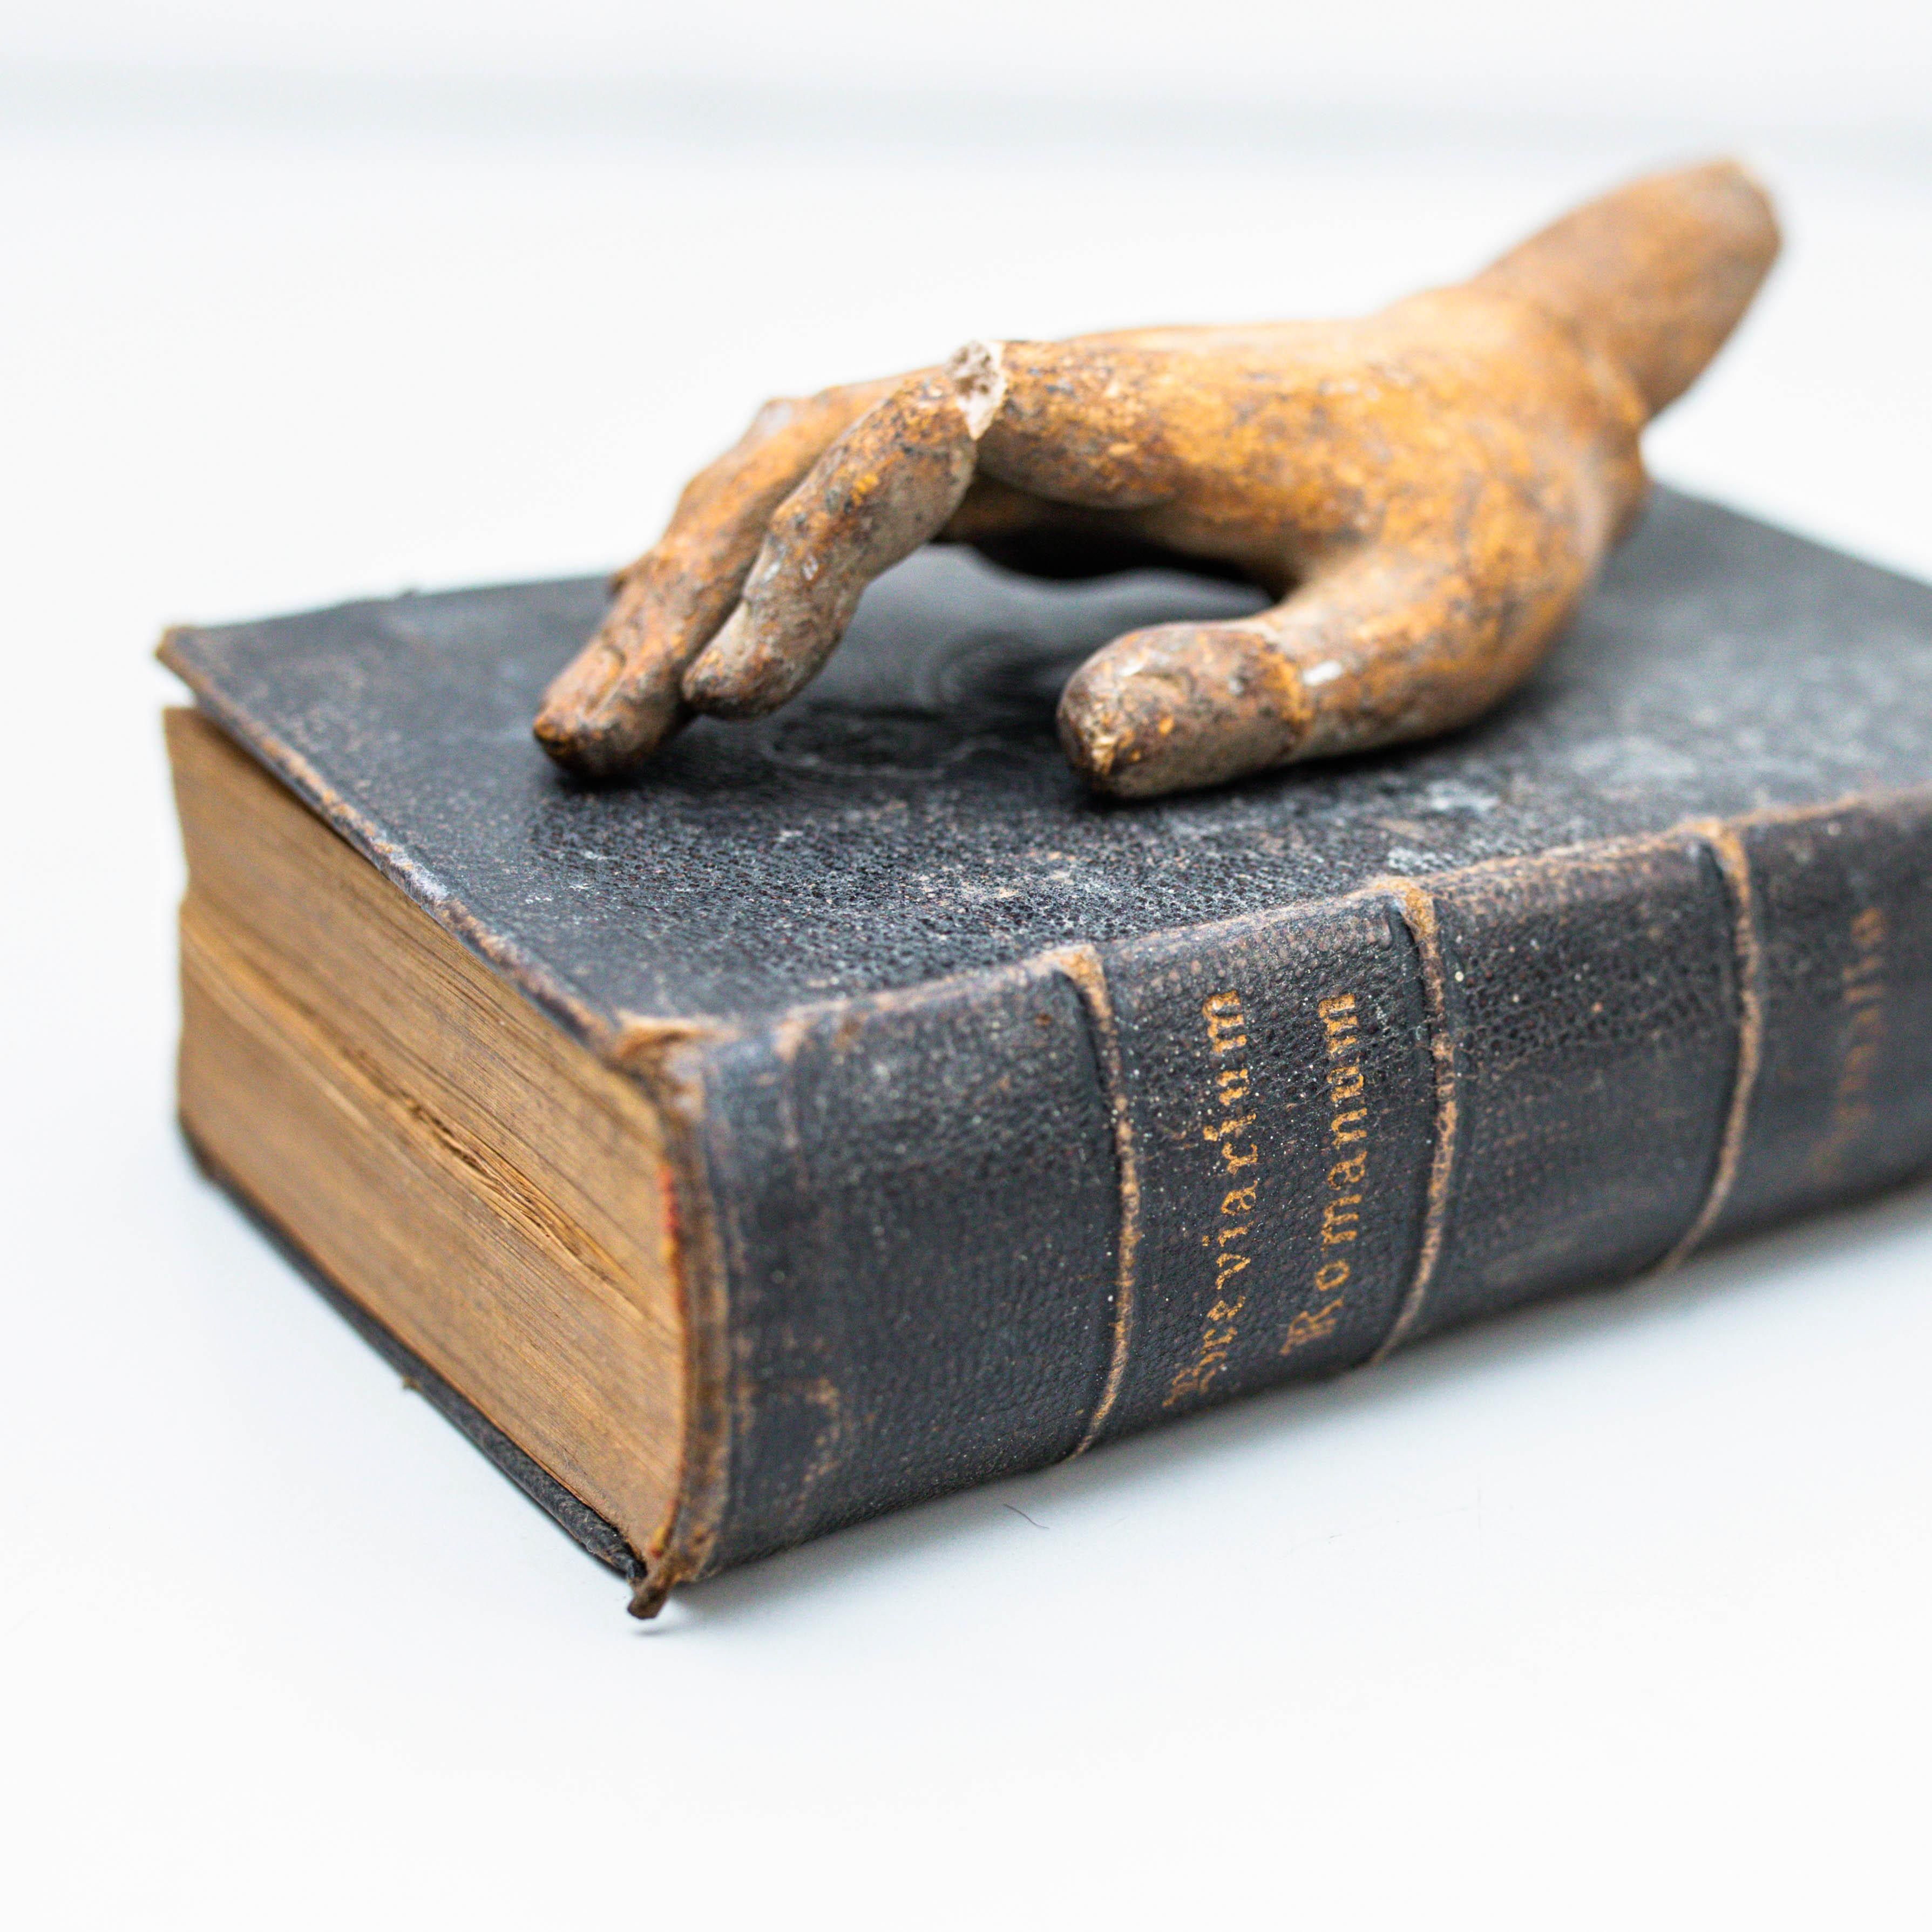 Artwork With Old Book and Mysterious Sculpture Hand, Circa 1990  For Sale 3